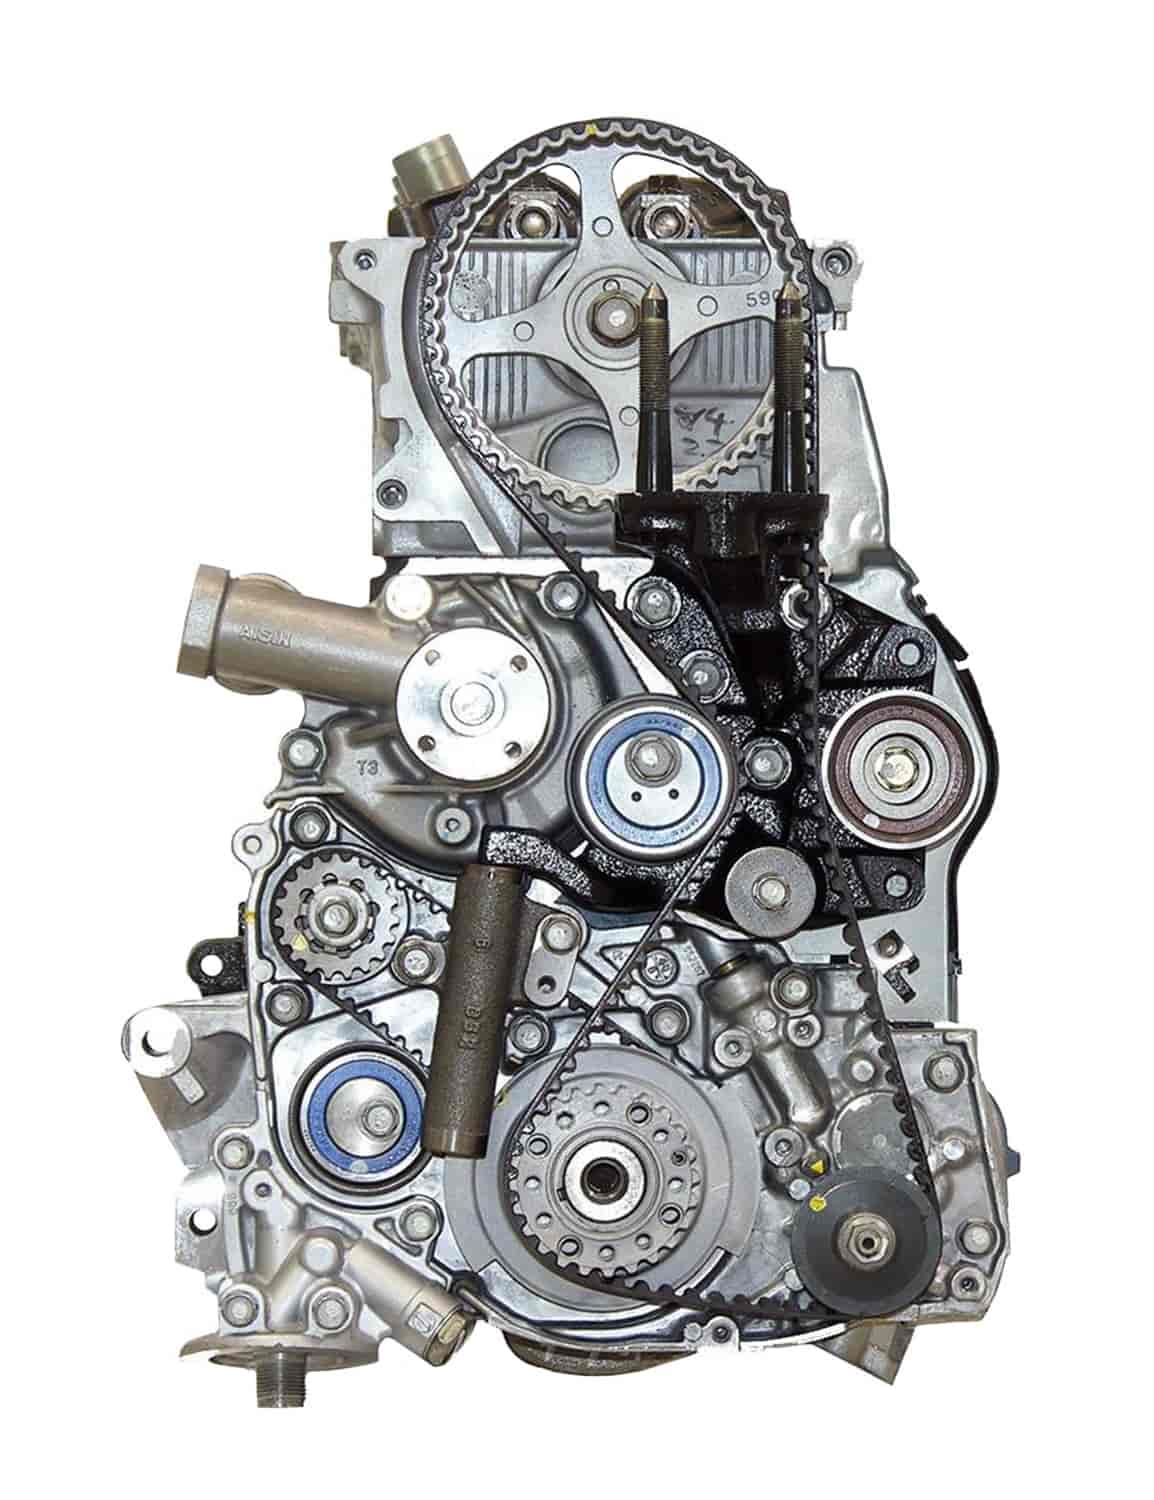 Remanufactured Crate Engine for 1998-2005 Mitsubishi, Chrysler, & Dodge with 2.4L L4